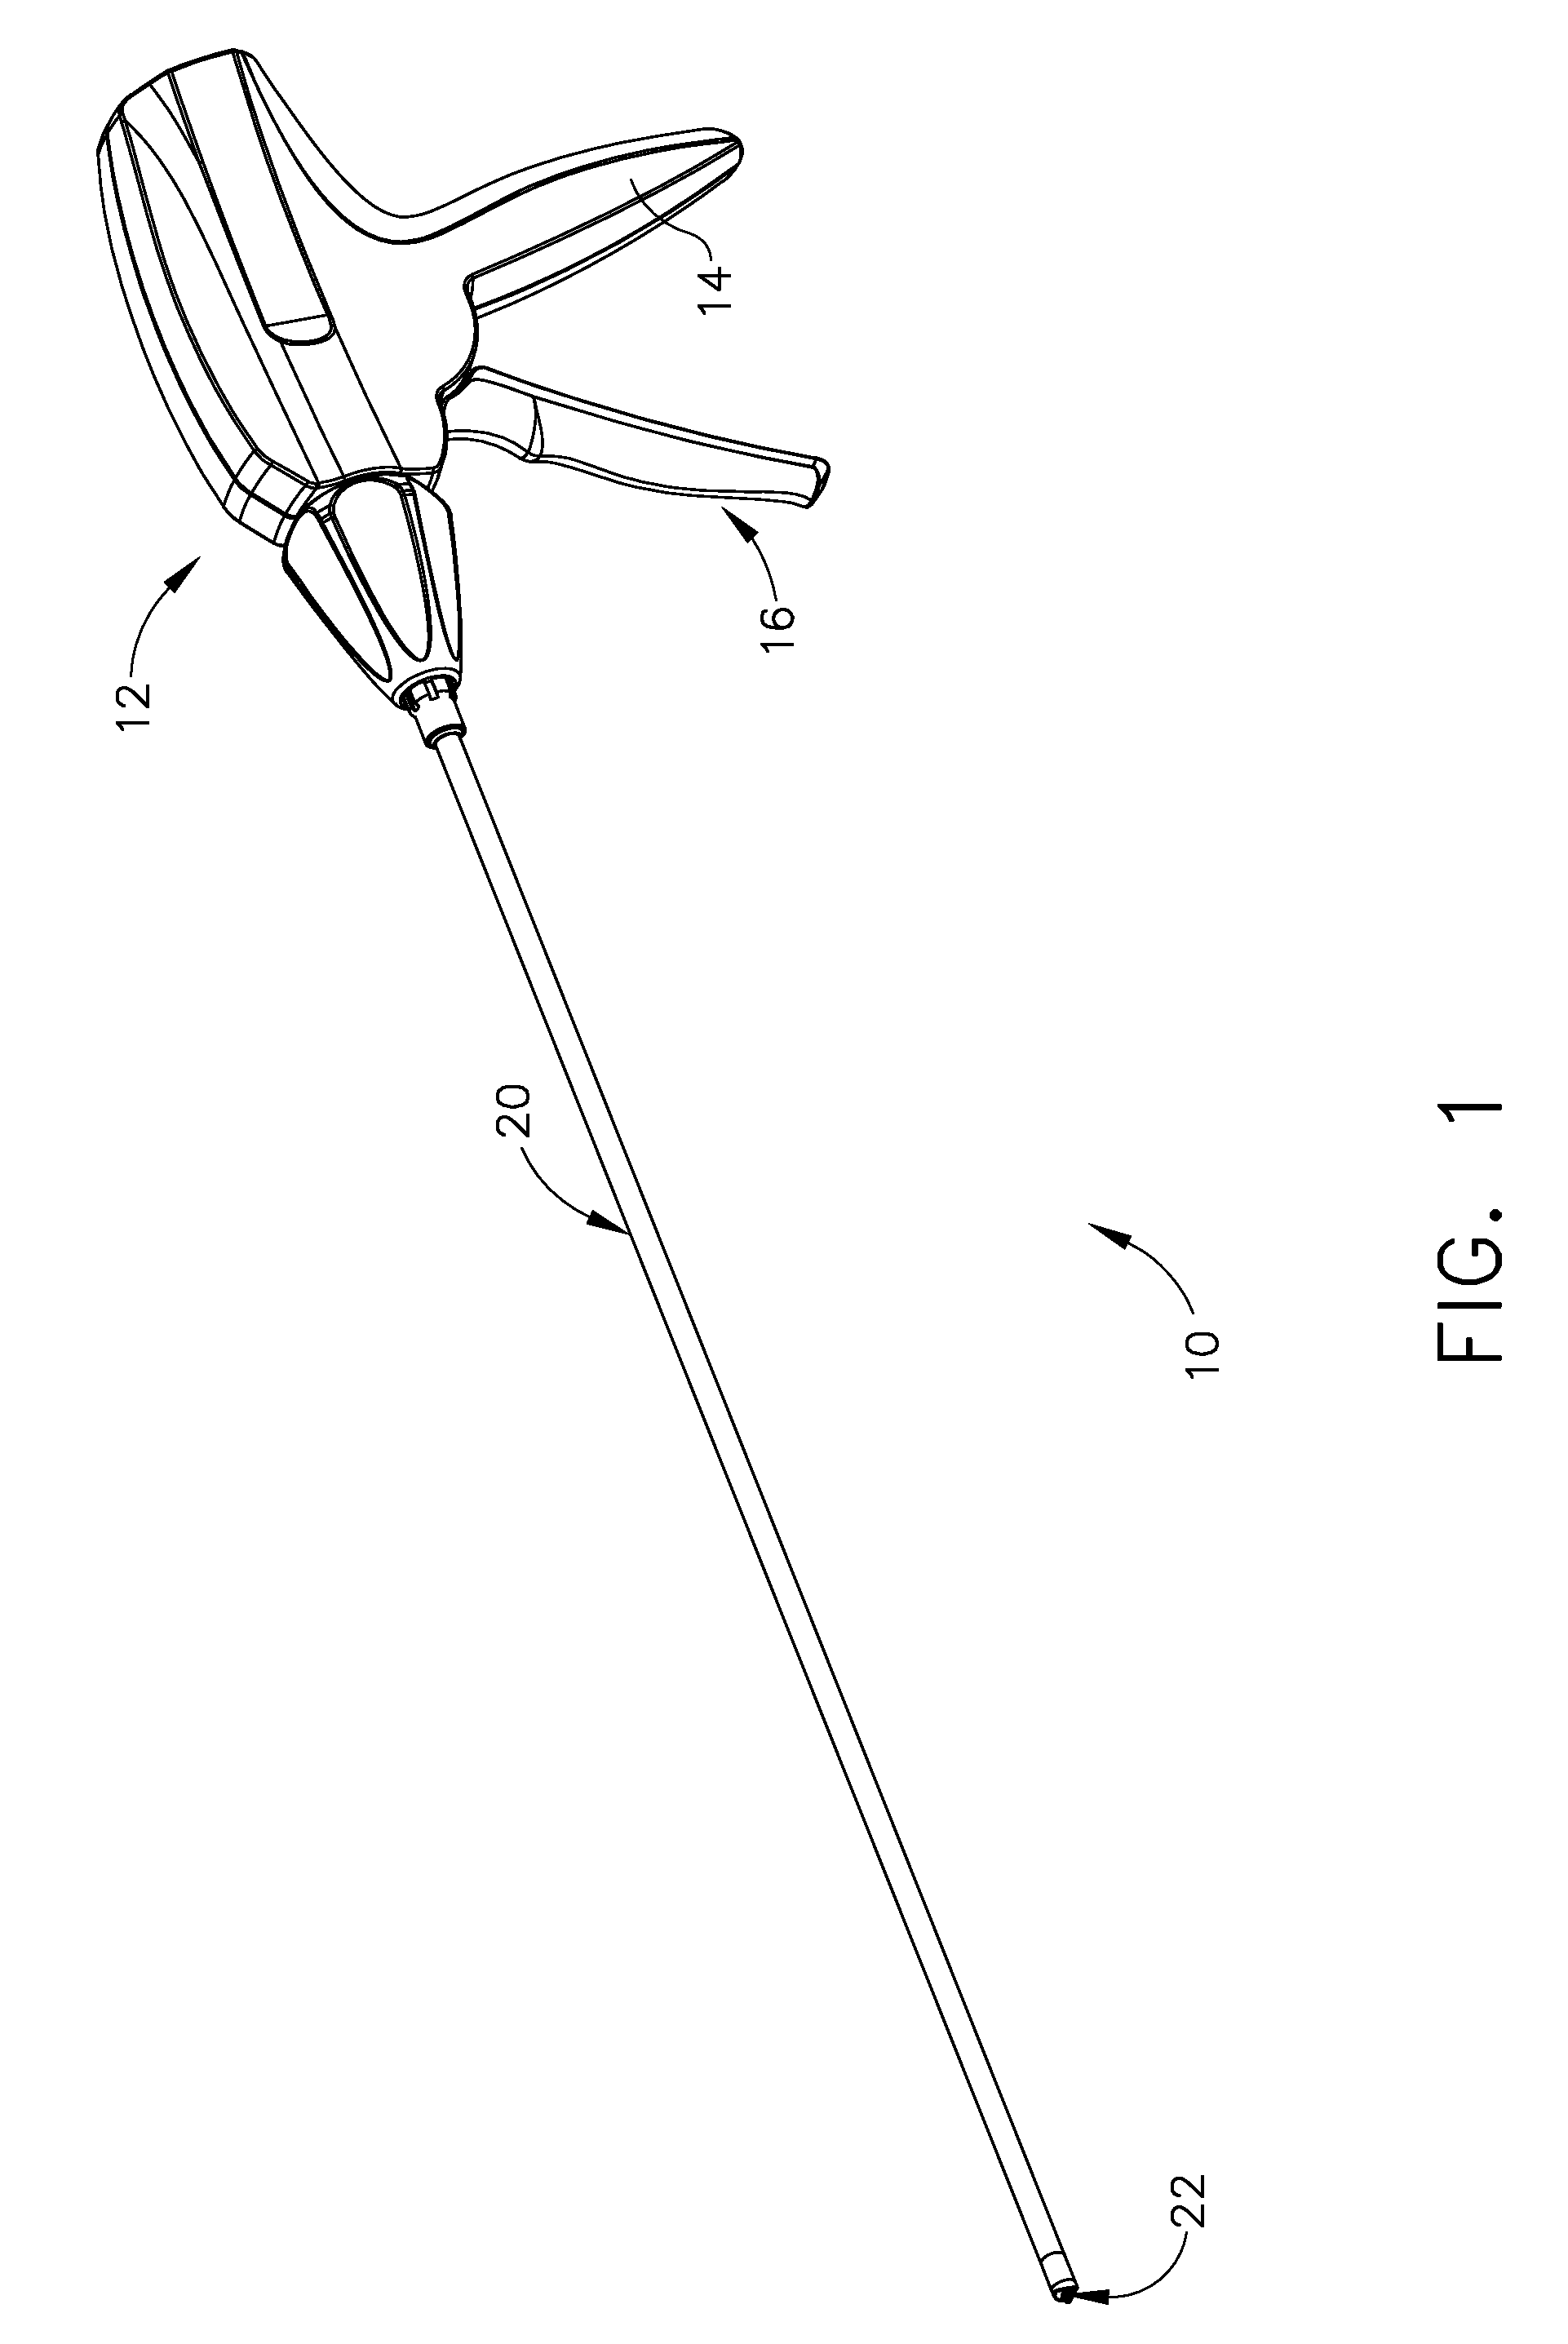 Surgical fastener for applying a large staple through a small delivery port